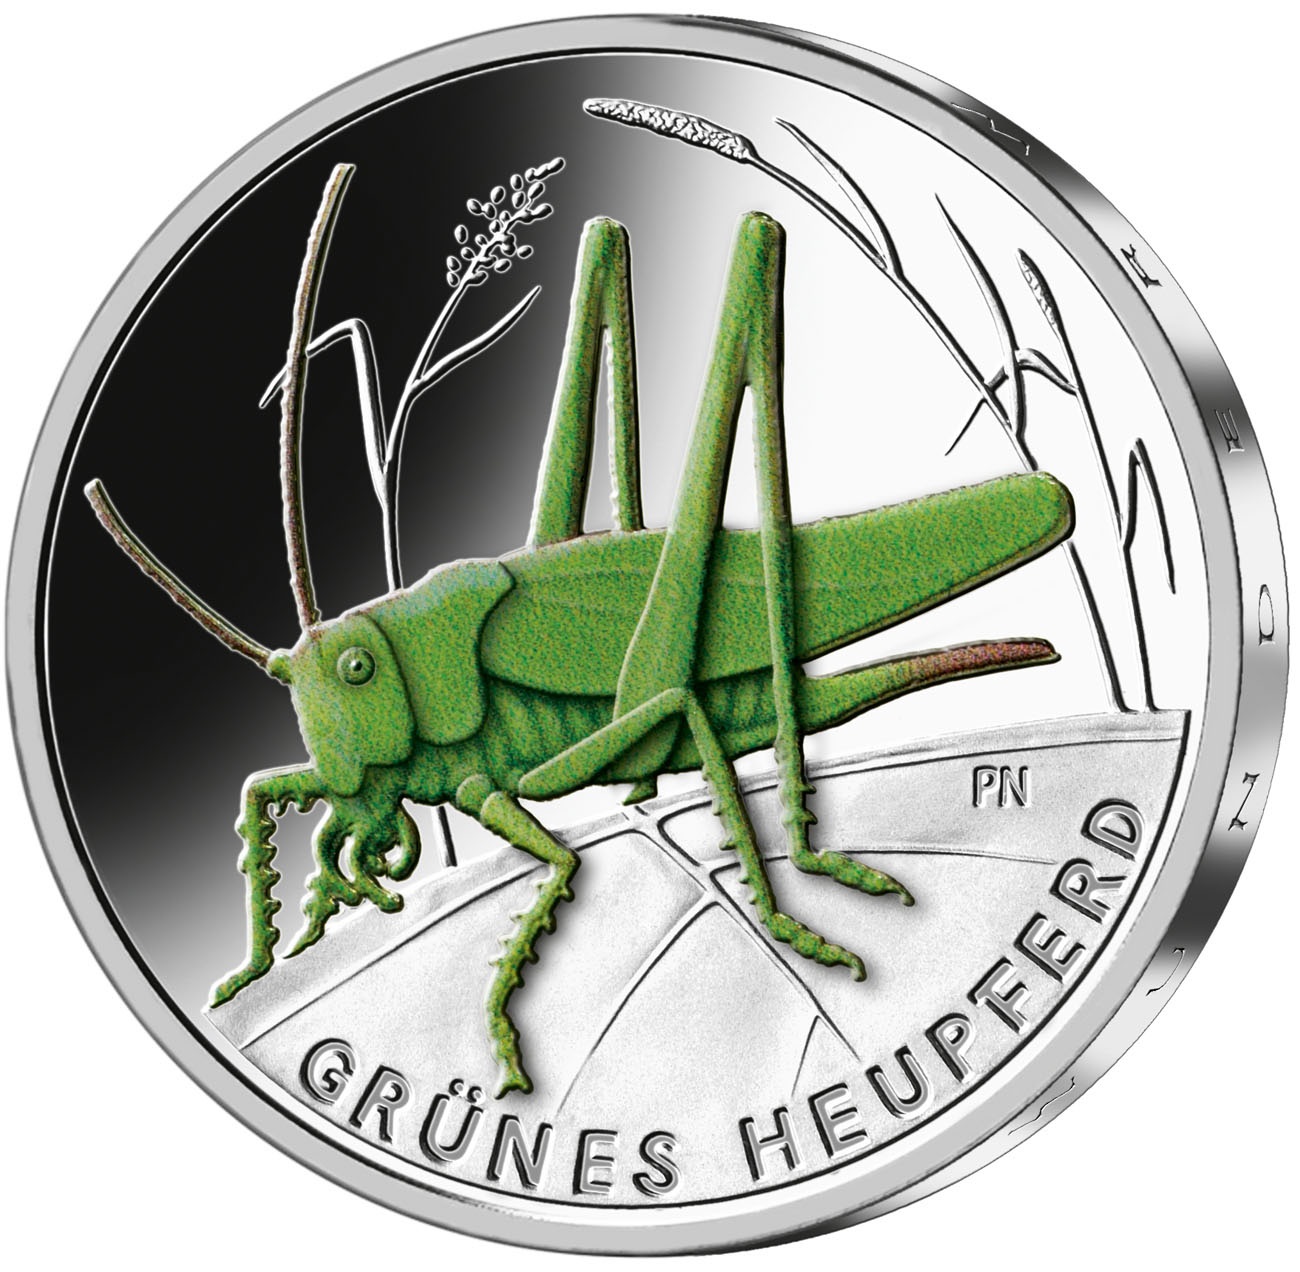 (EUR03.Proof.2024.90N124Q1S5) 5 euro Germany 2024 A Proof - Great green bush-cricket Reverse (zoom)